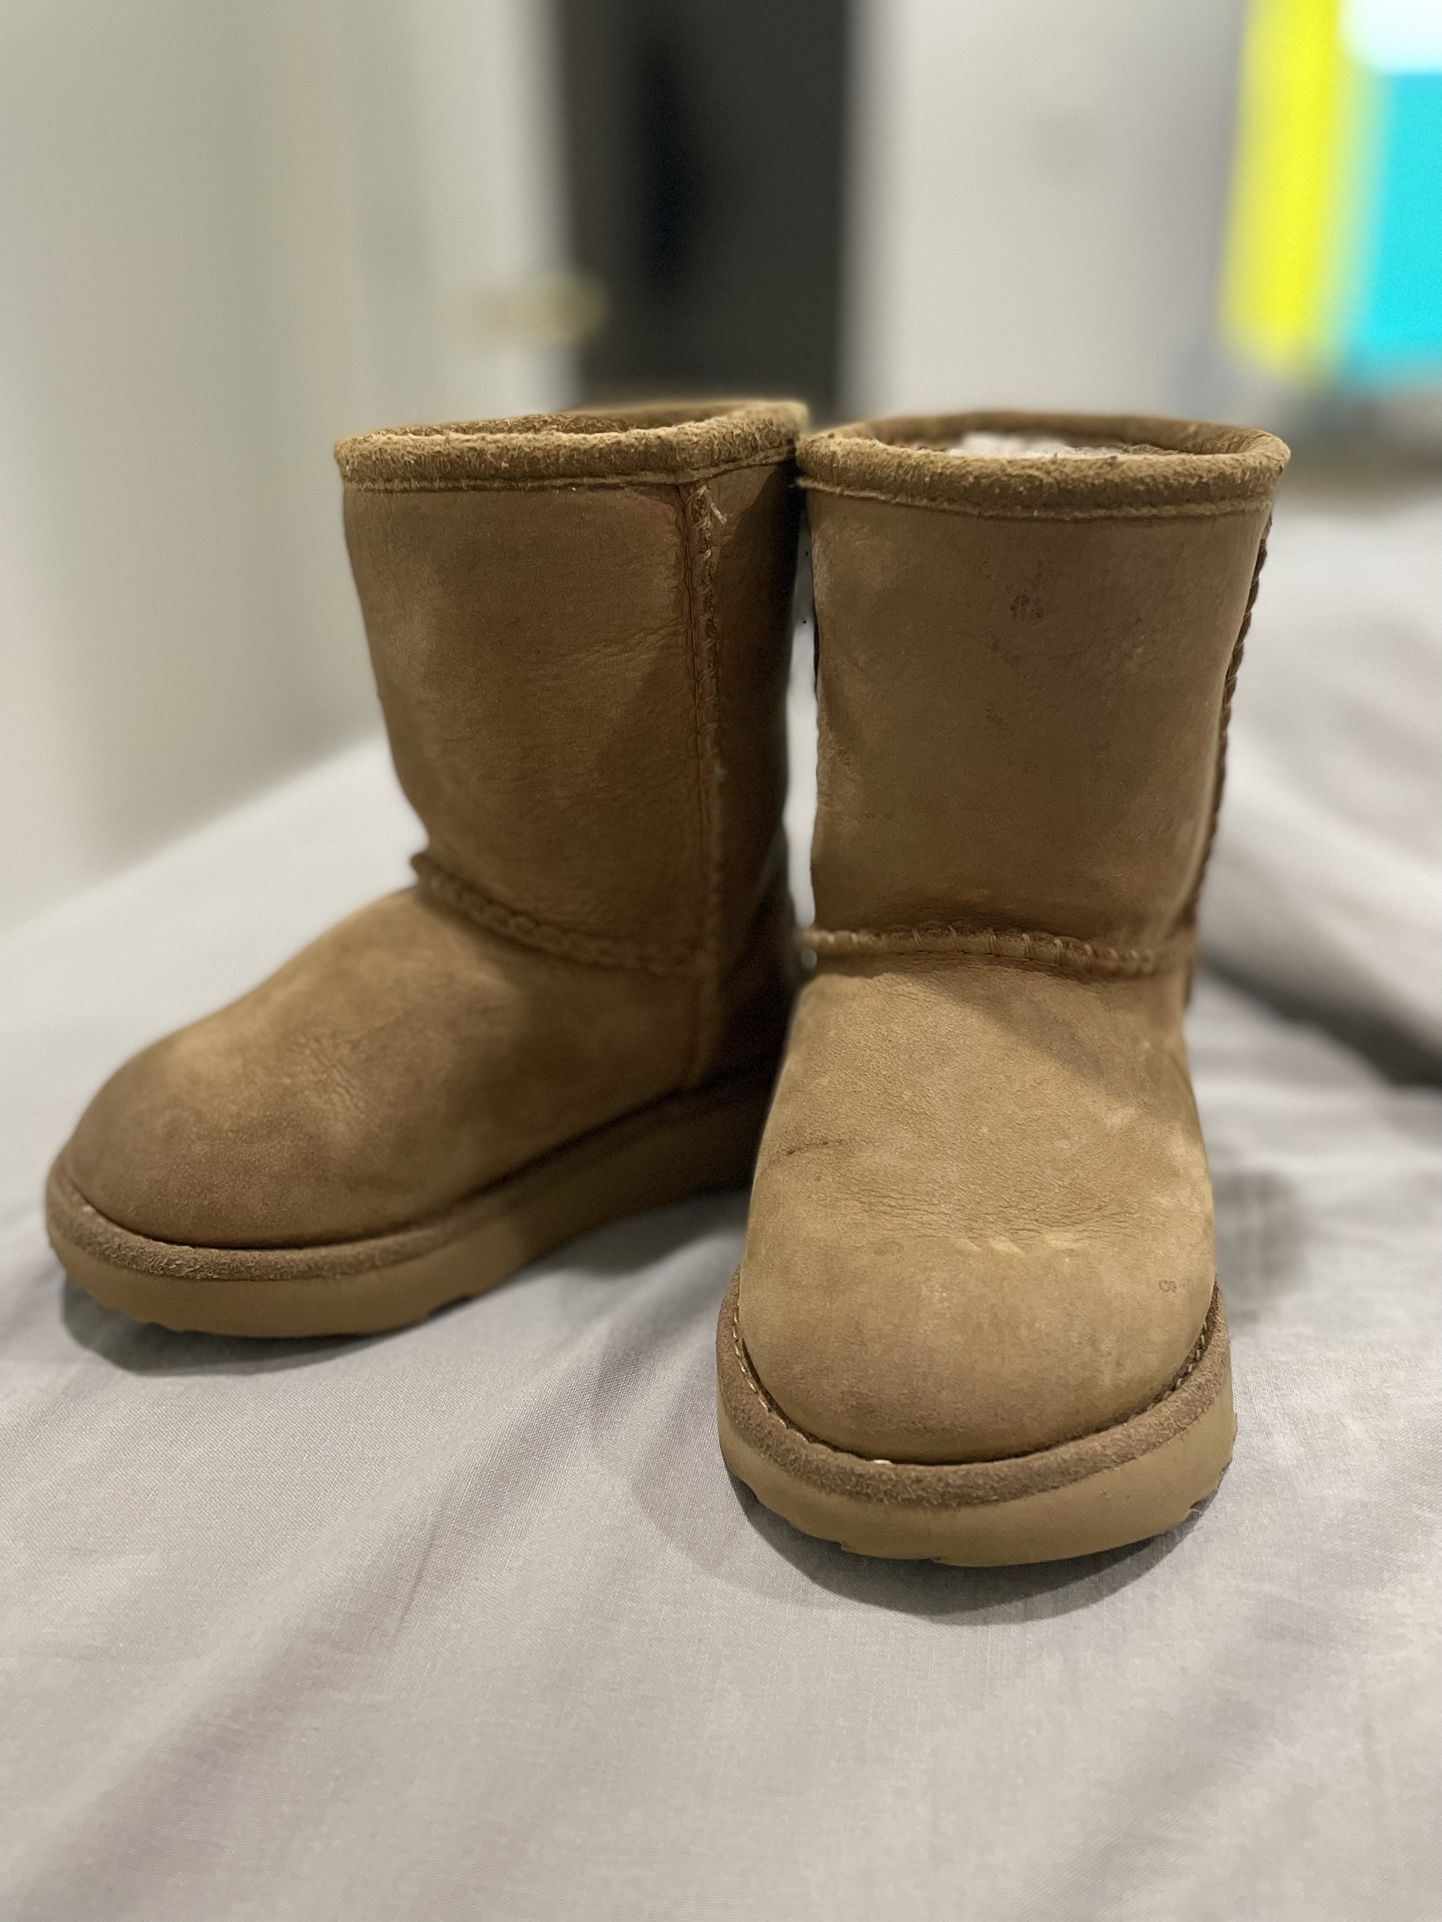 Toddler Waterproof Classic Ugg Boots (Size 6C)